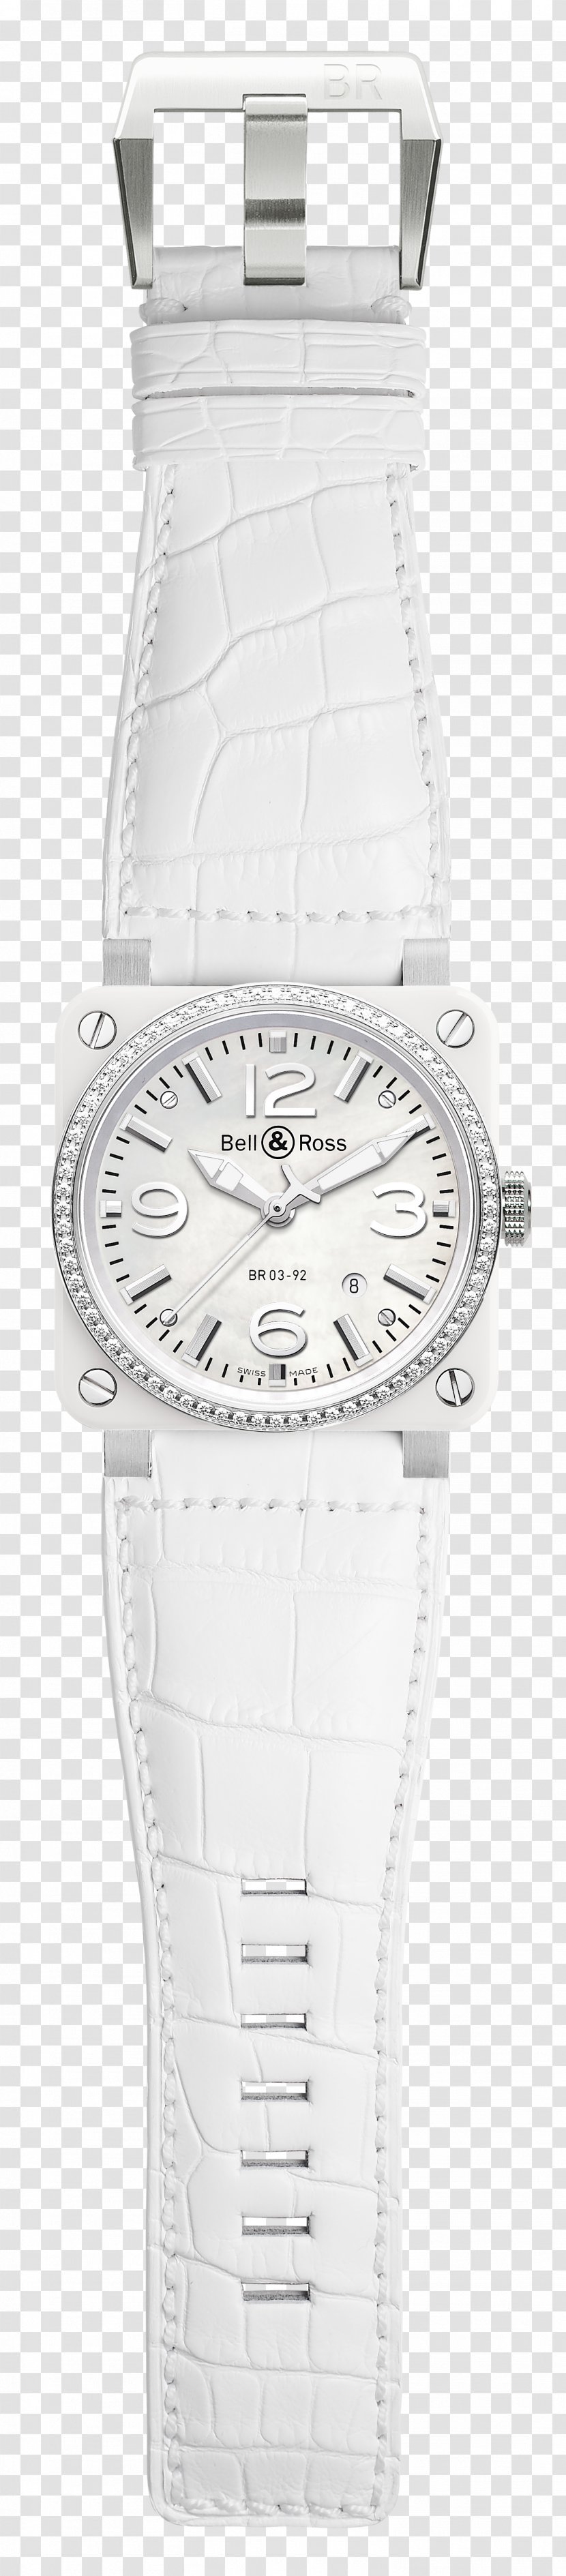 Watch Strap Bell & Ross - Ceramic Transparent PNG